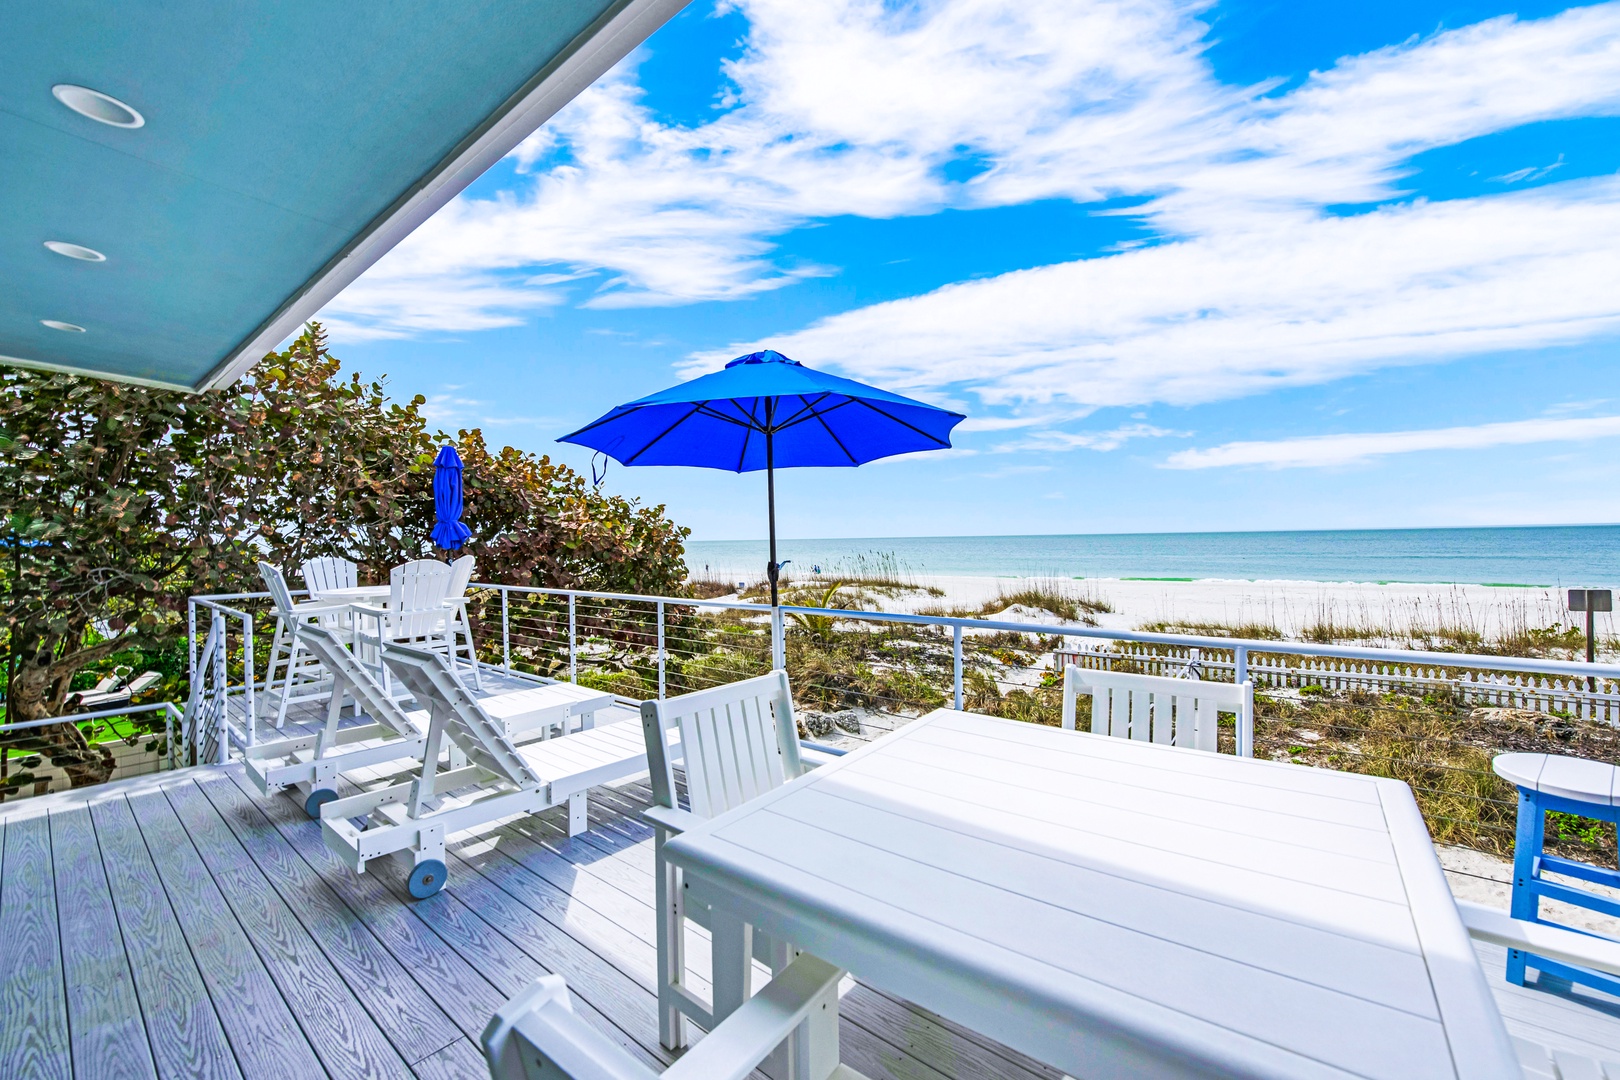 Side B - Beach Front Deck - Lounging and Dining Area